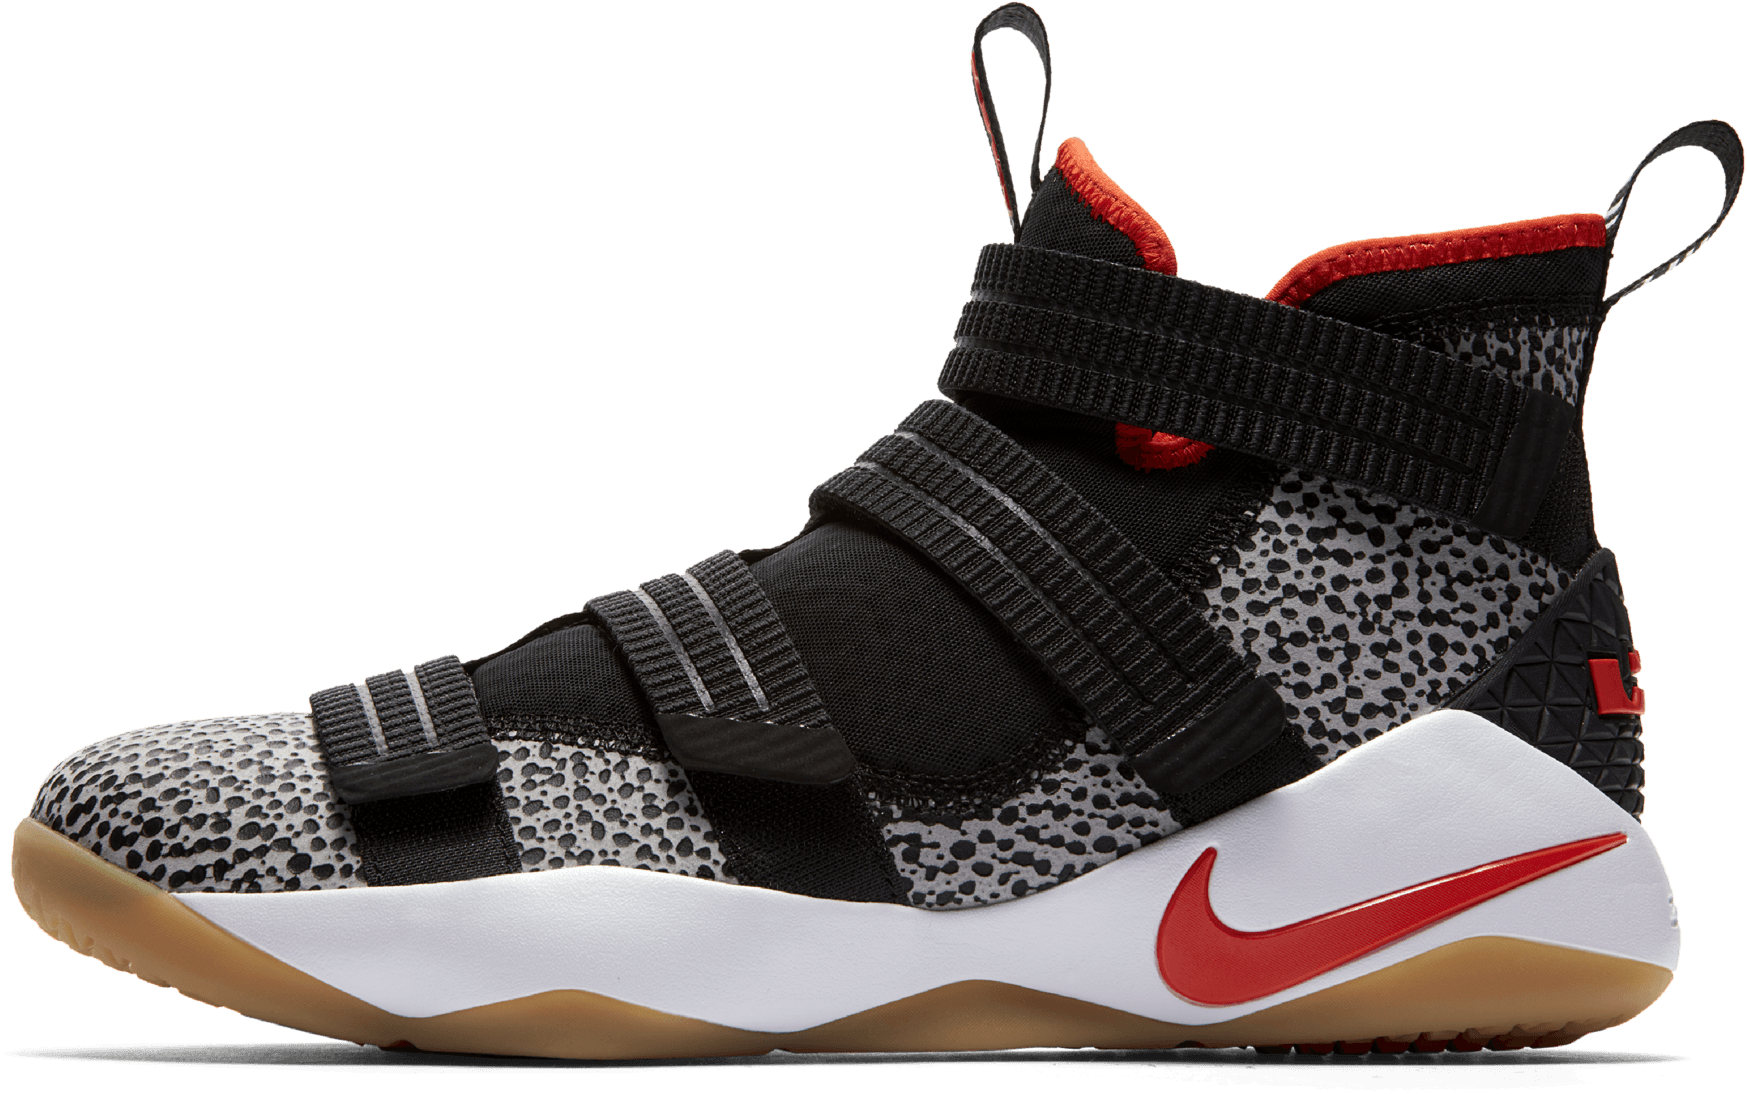 Nike Lebron Soldier 11 - Review, Deals, Pics of 23 Colorways